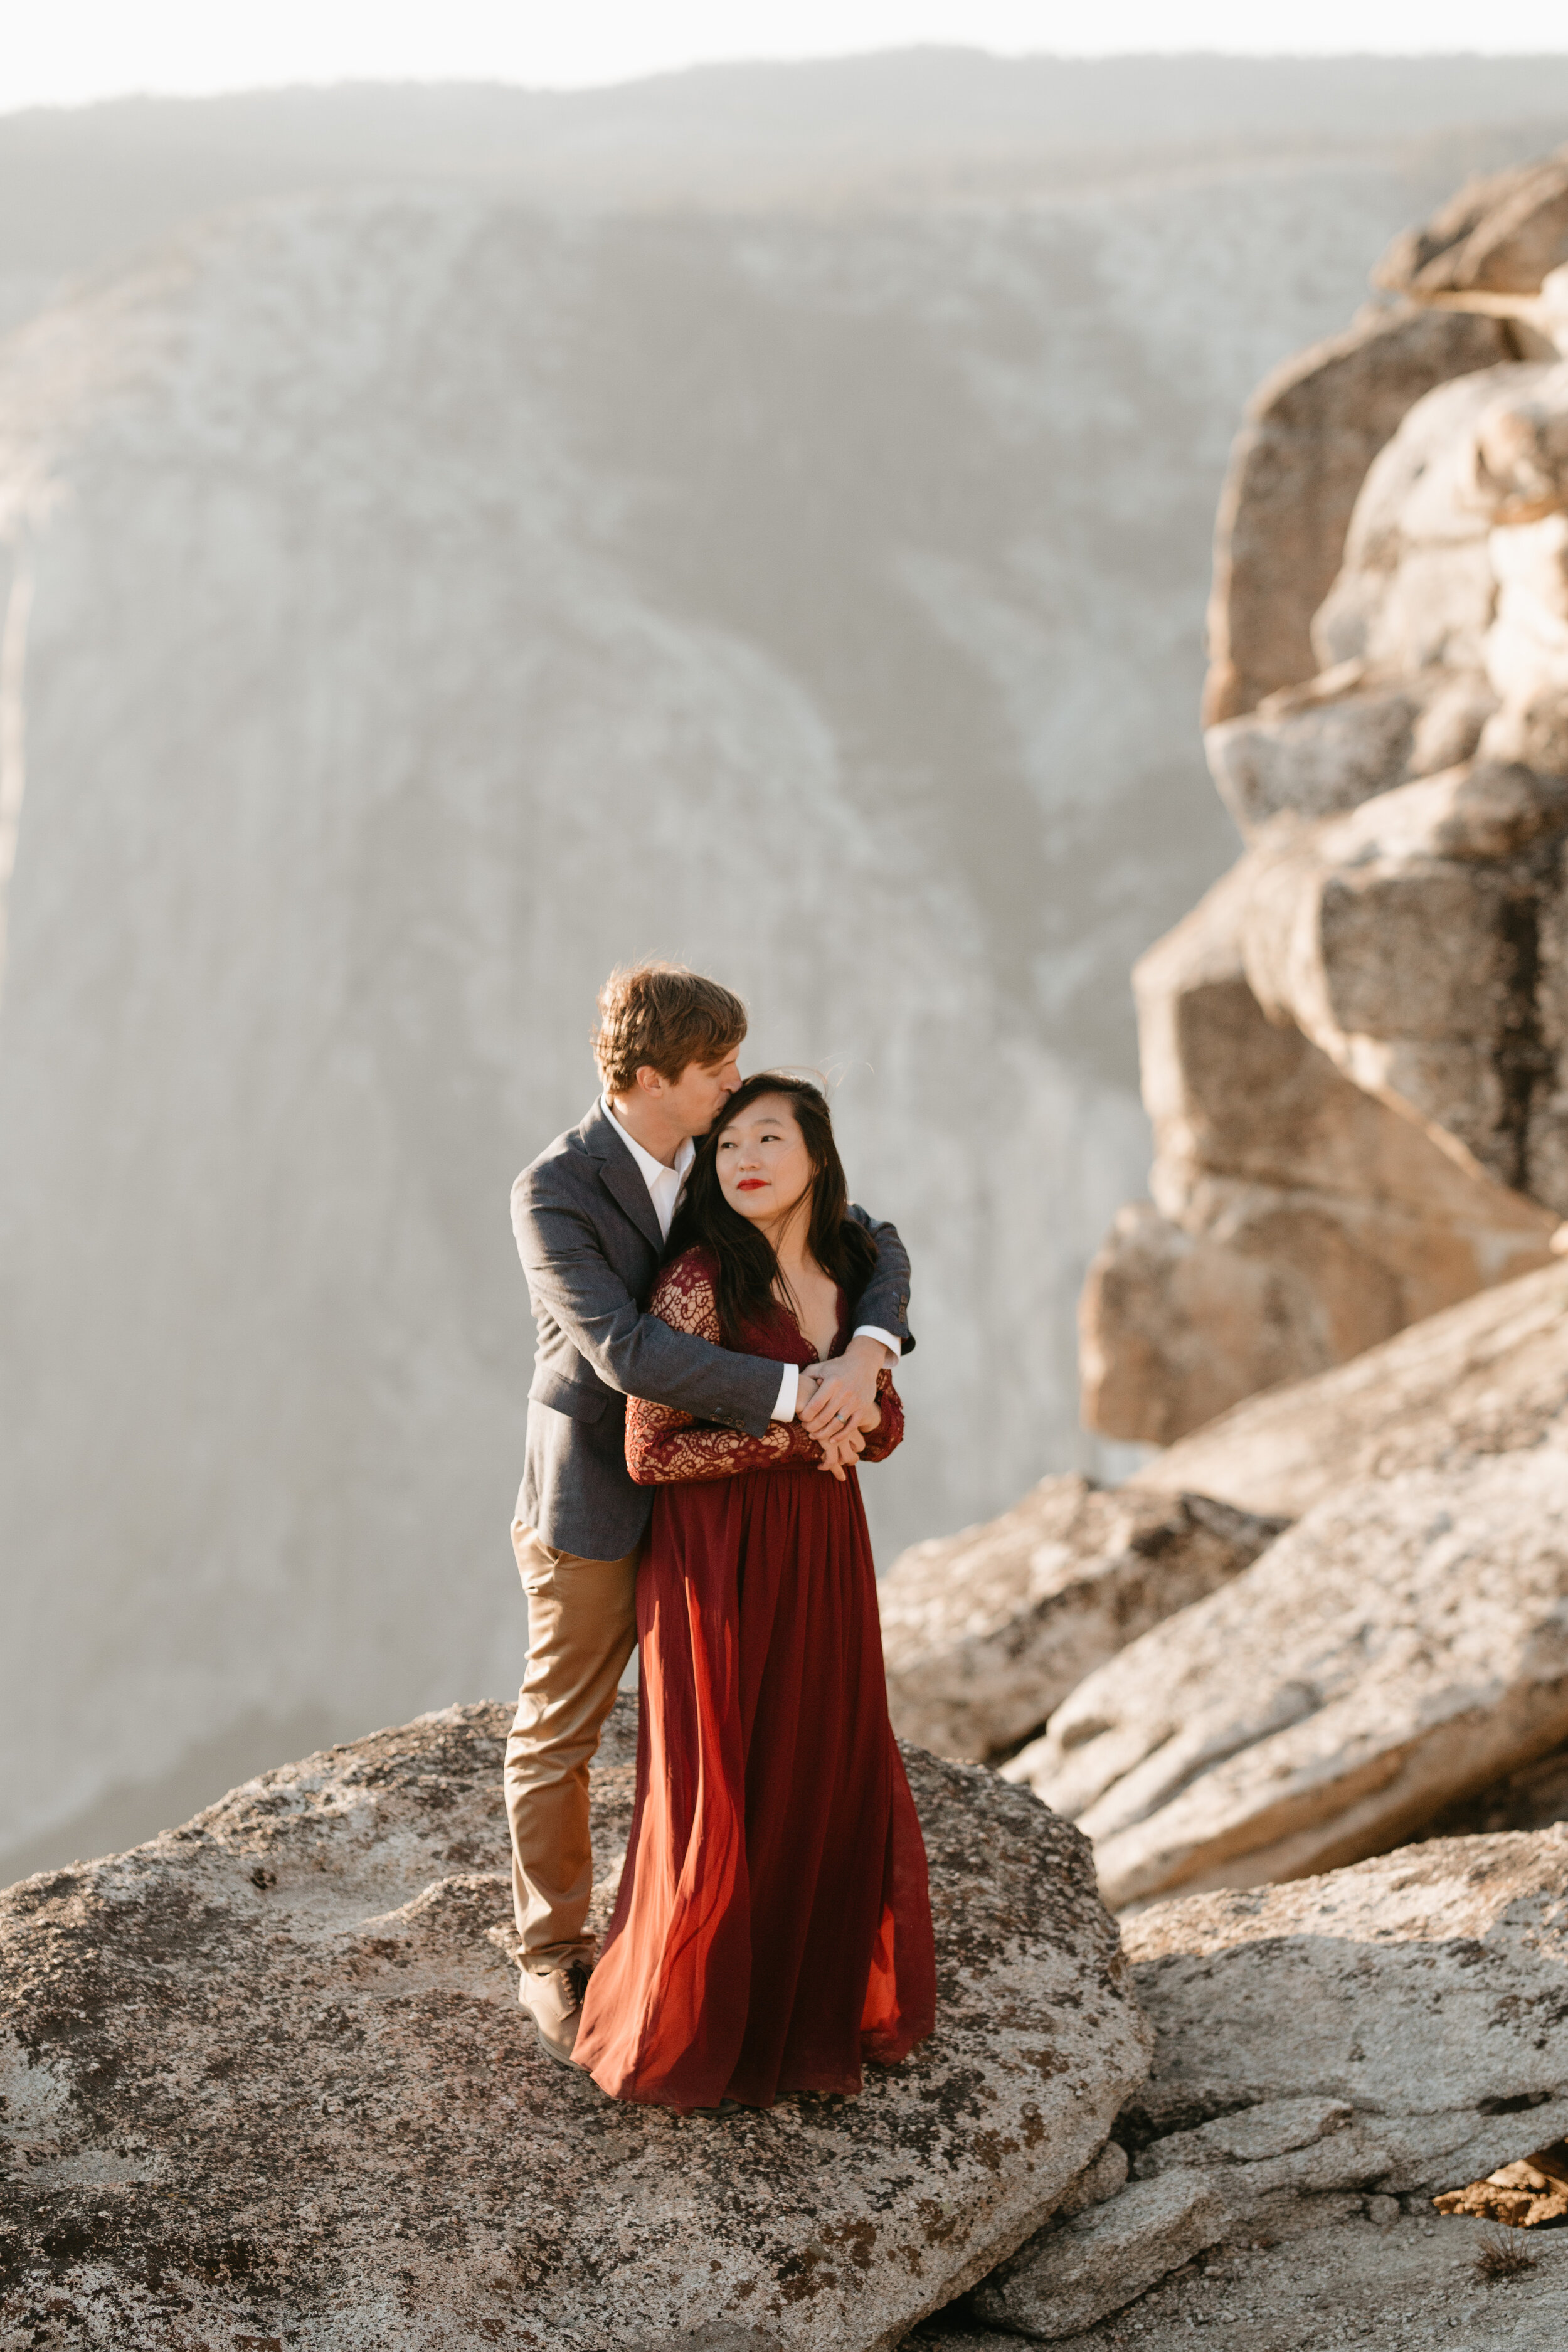 yosemite-national-park-couples-session-at-taft-point-and-yosemite-valley-yosemite-elopement-photographer-nicole-daacke-photography-136.jpg